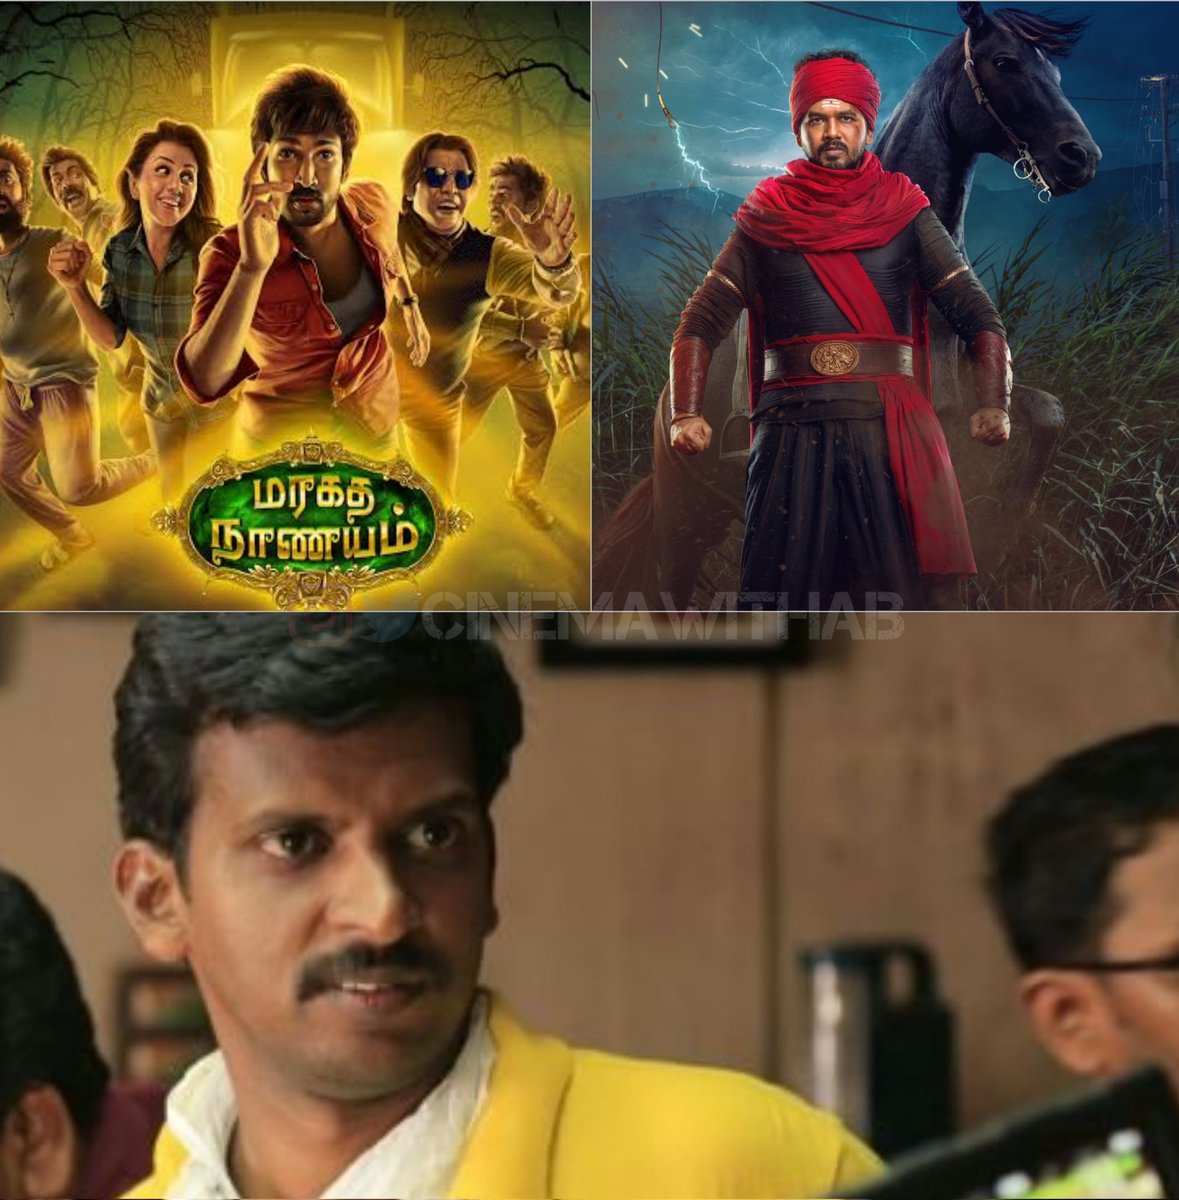 ARK Saravan Appreciation tweet👏
- Introduced 2 different genres of films to Tamil Cinema
- Hard to give entertaining comedy movies...yet he delivered with these genres
- Both movies Satisfy Kids and Family Audiences 
#MaragathaNaanayam | #Veeran